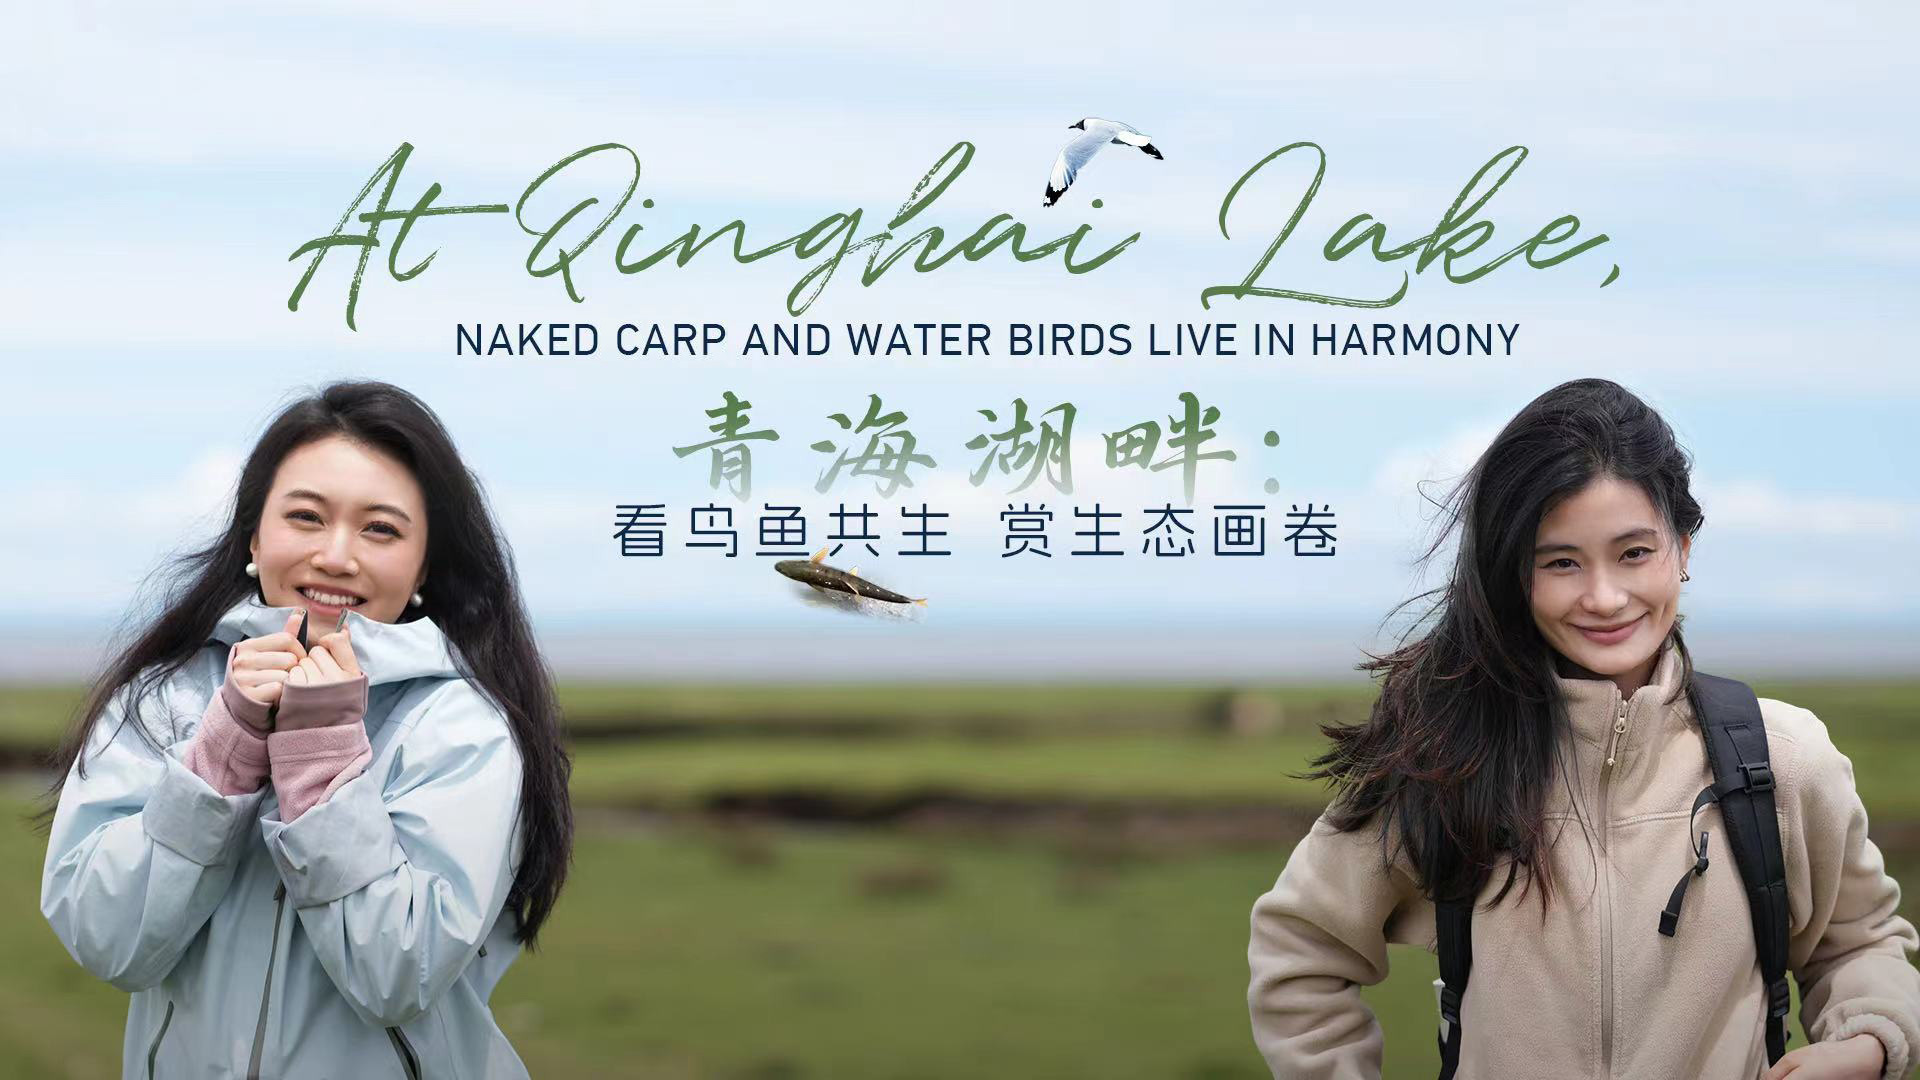 Live: At Qinghai Lake, naked carp and water birds live in harmony